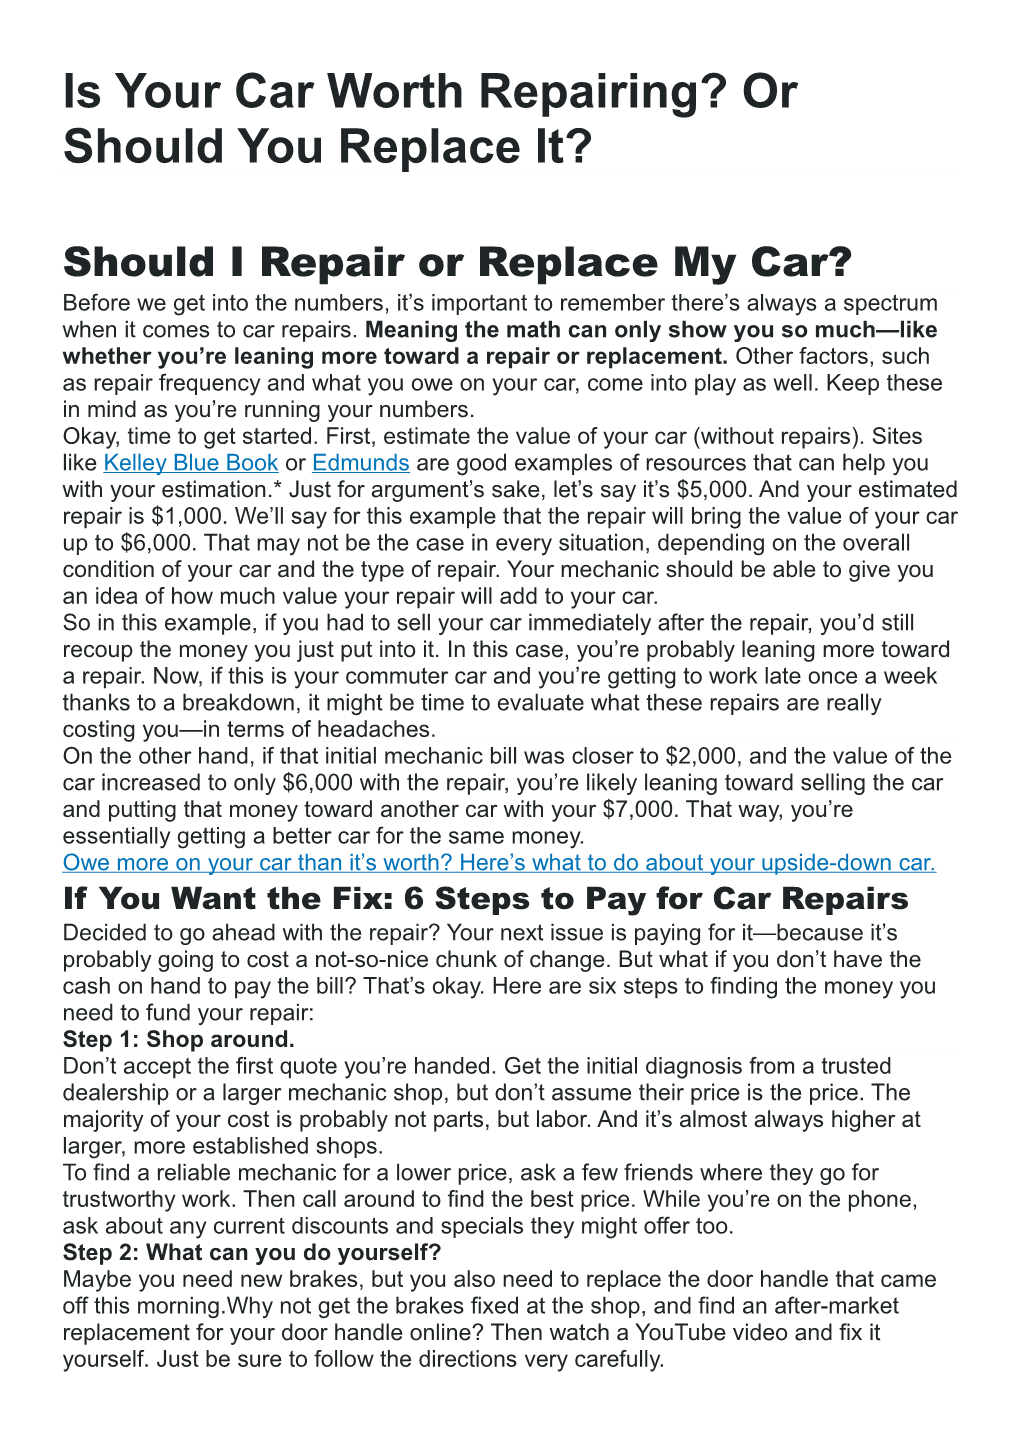 Is Your Car Worth Repairing Or Should You Replace It